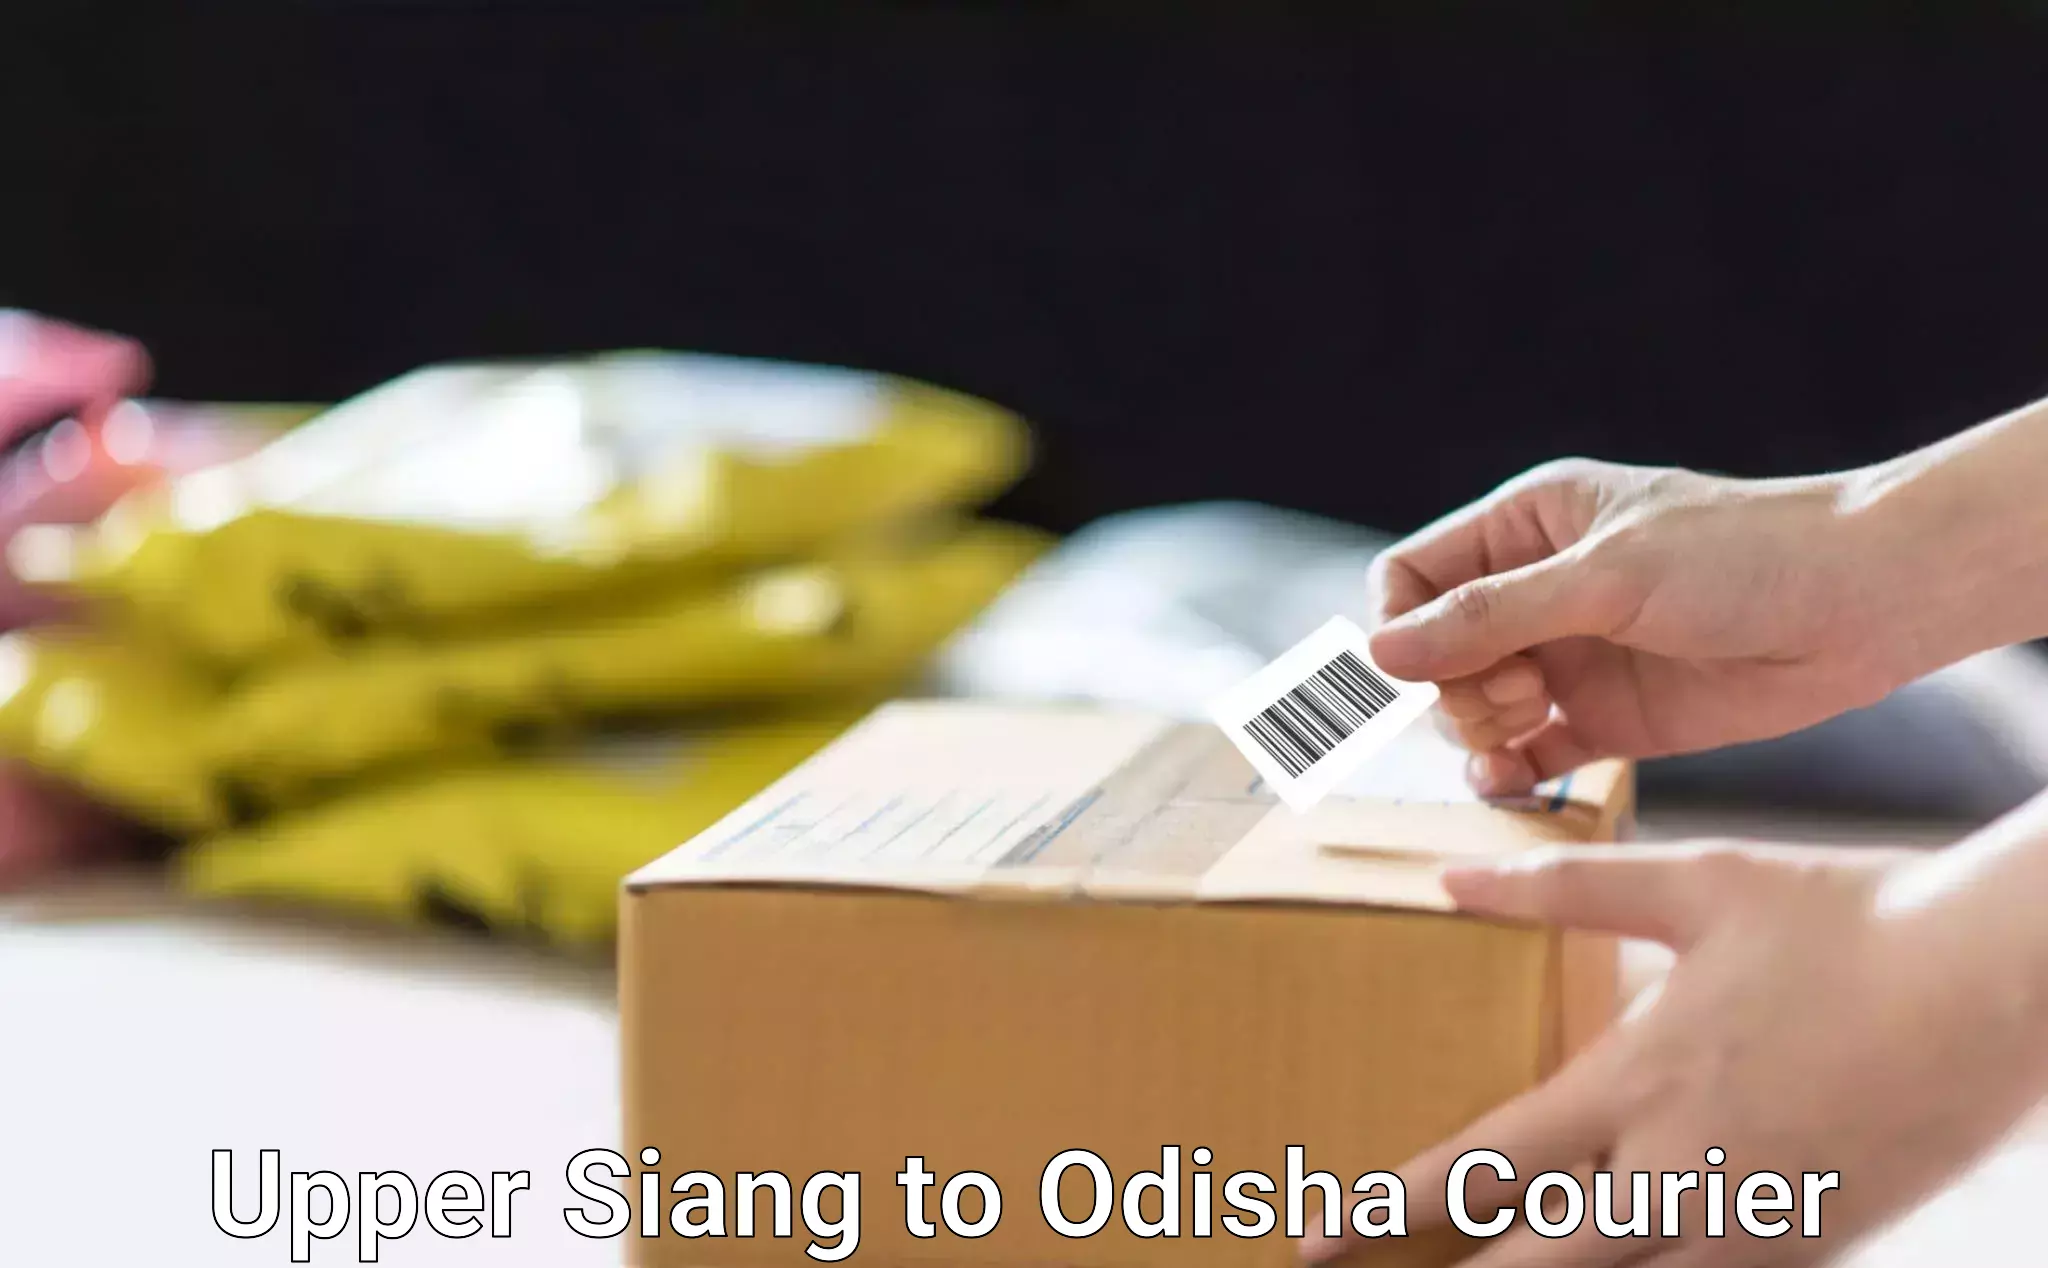 State-of-the-art courier technology in Upper Siang to Soro